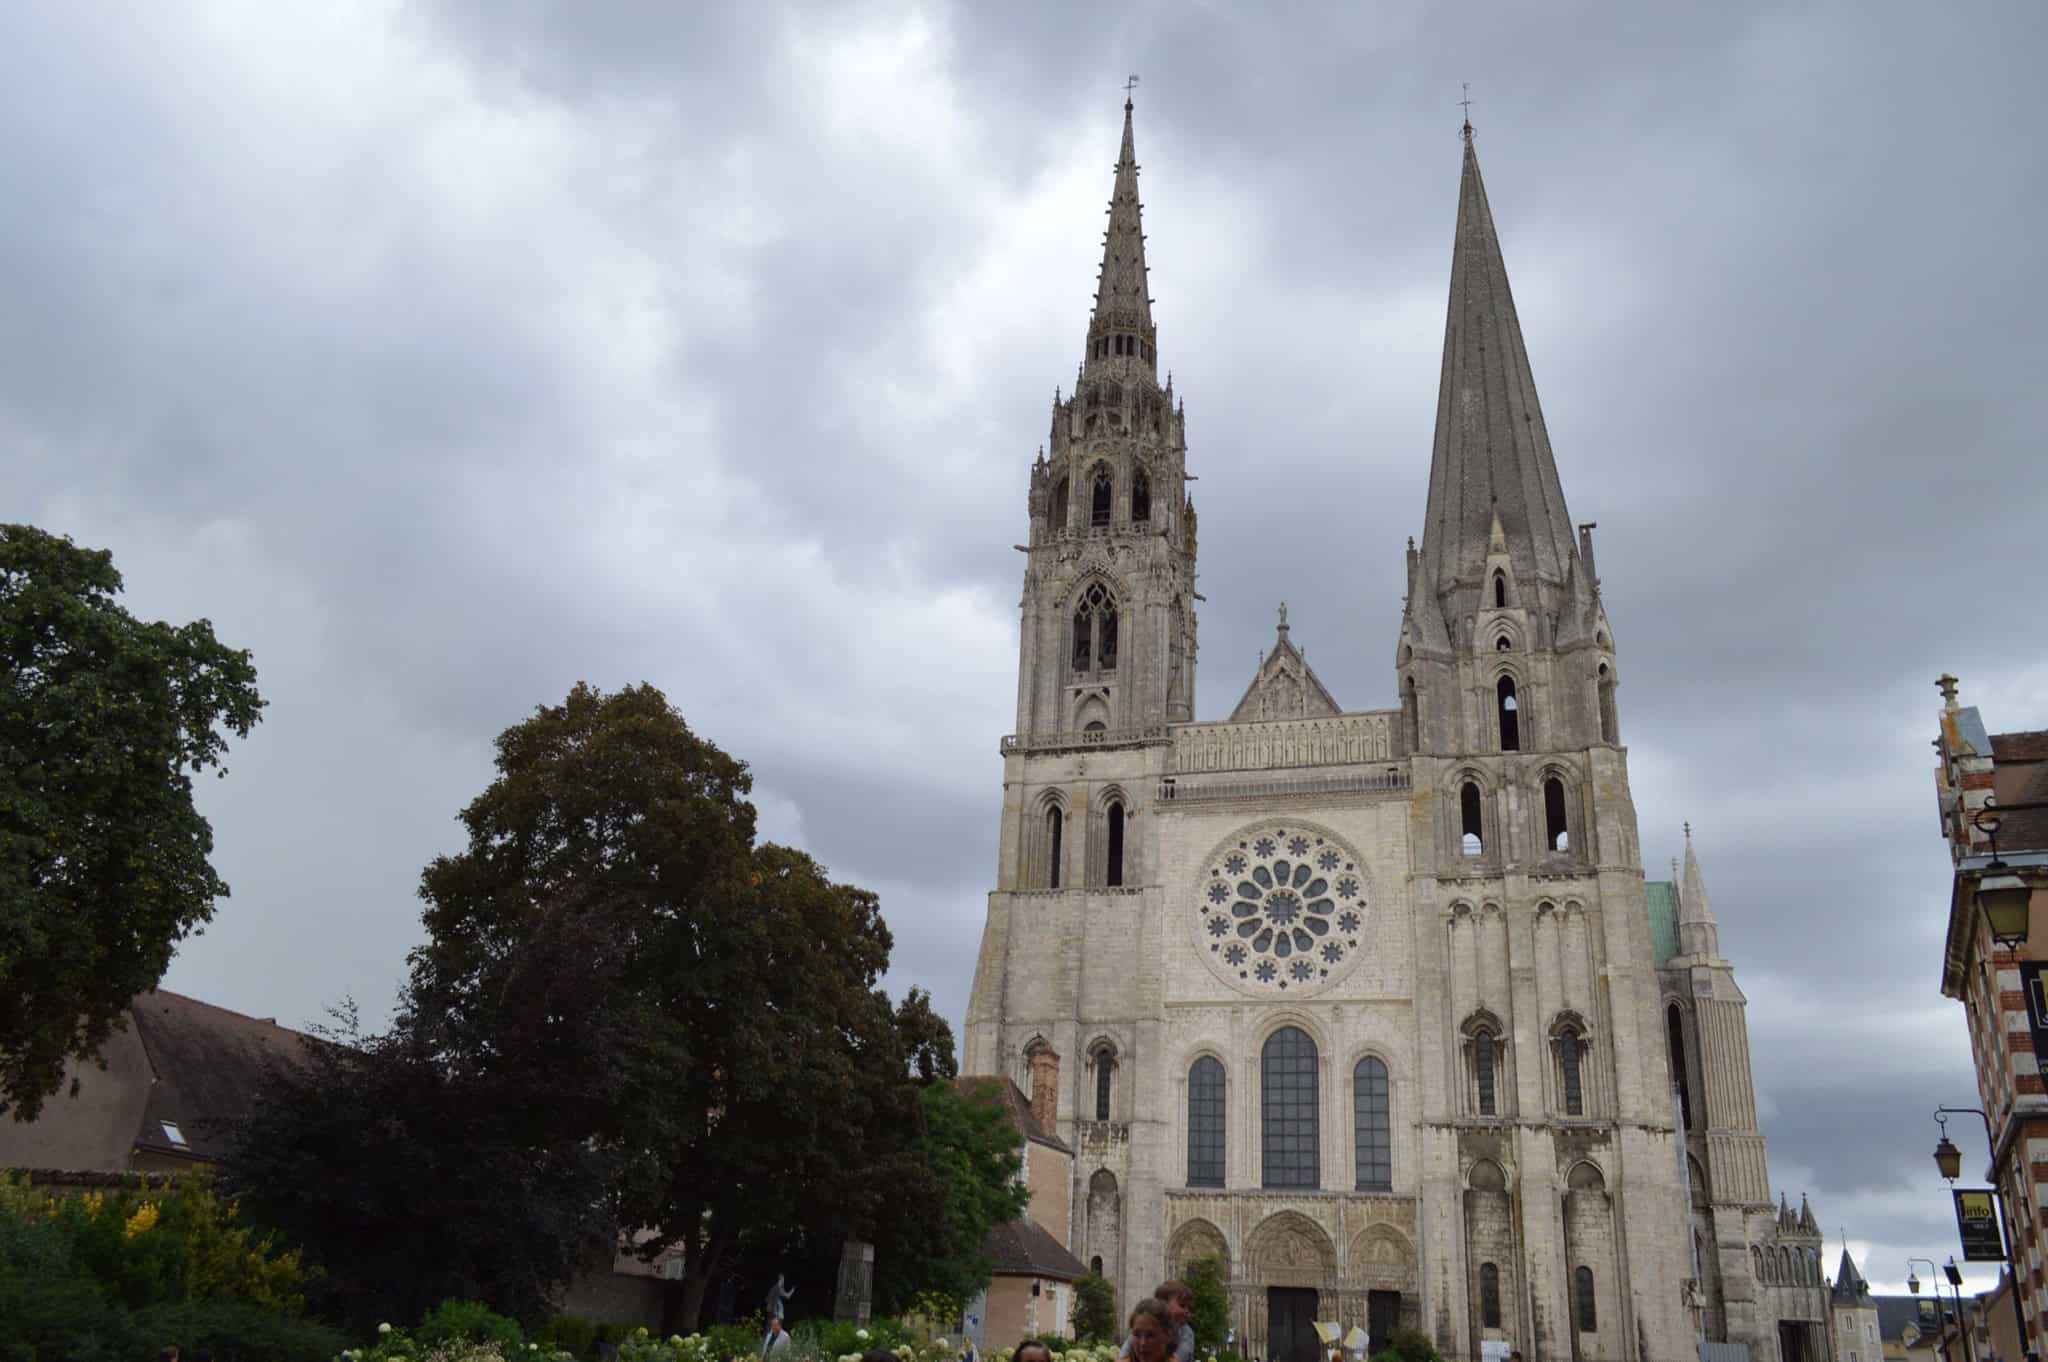 The mysterious Chartres Cathedral